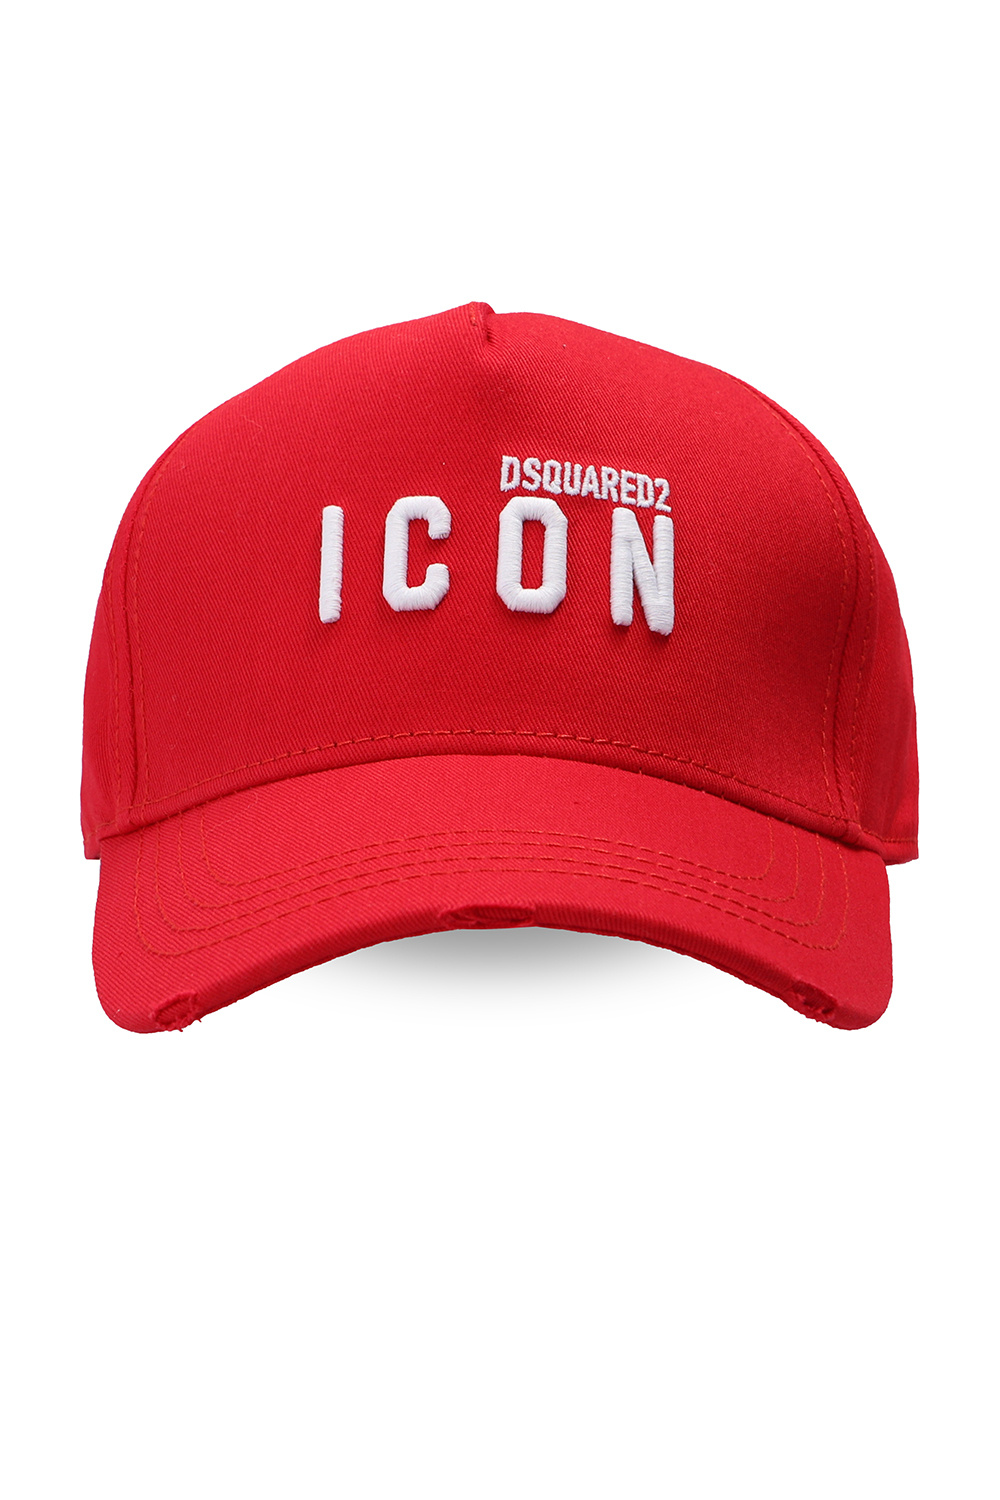 Dsquared2 Here s a look at some of the best new hats to hook with the